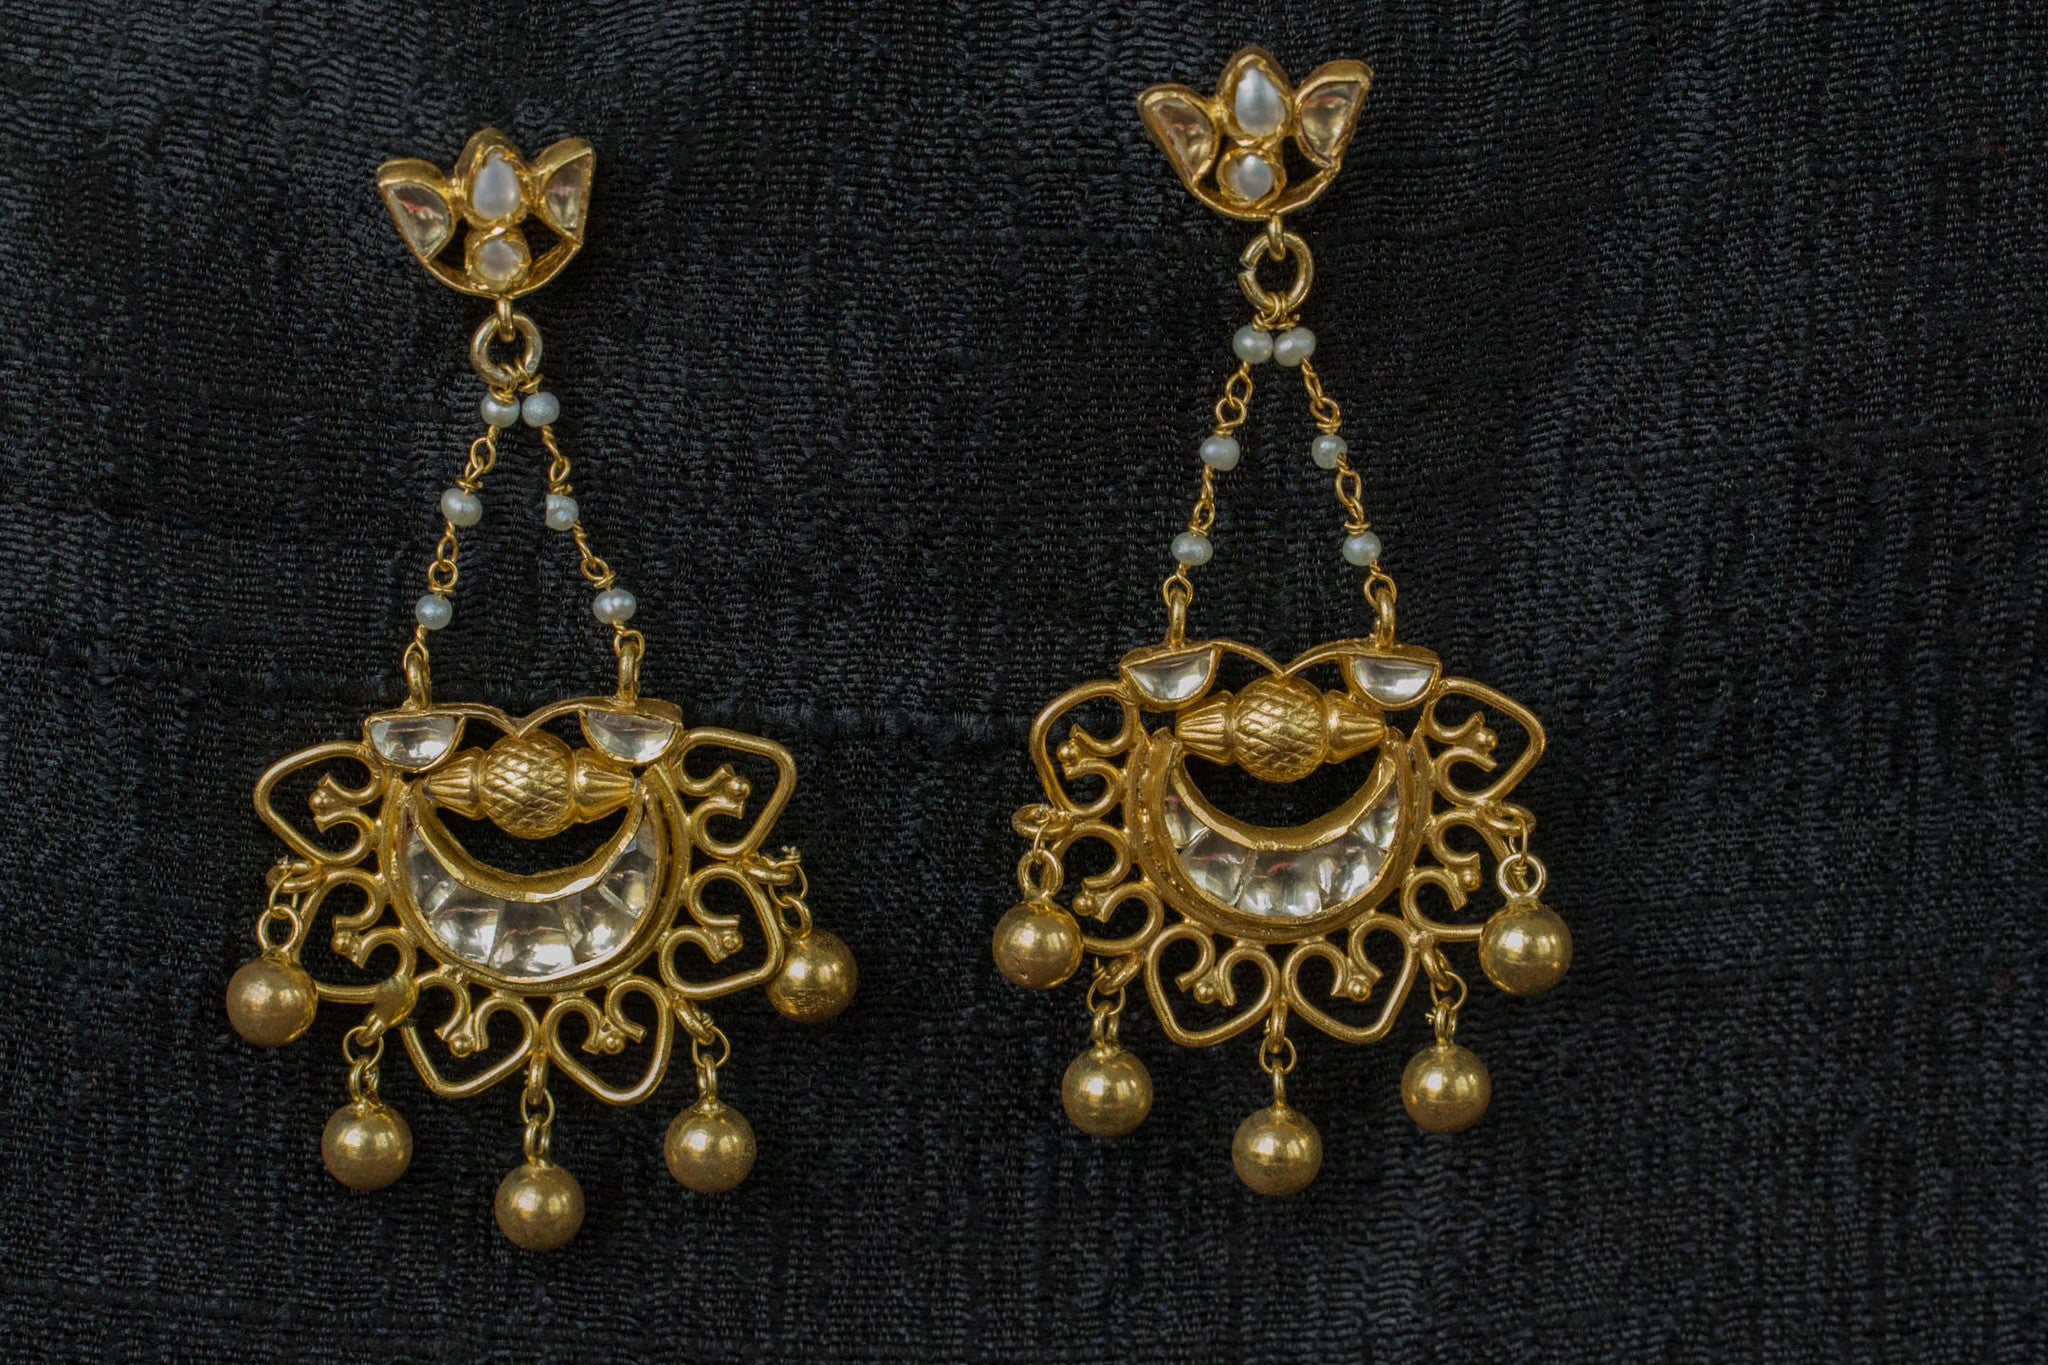 20a535-silver-plated-gold-amrapali-earrings-glass-pearl-floral-top